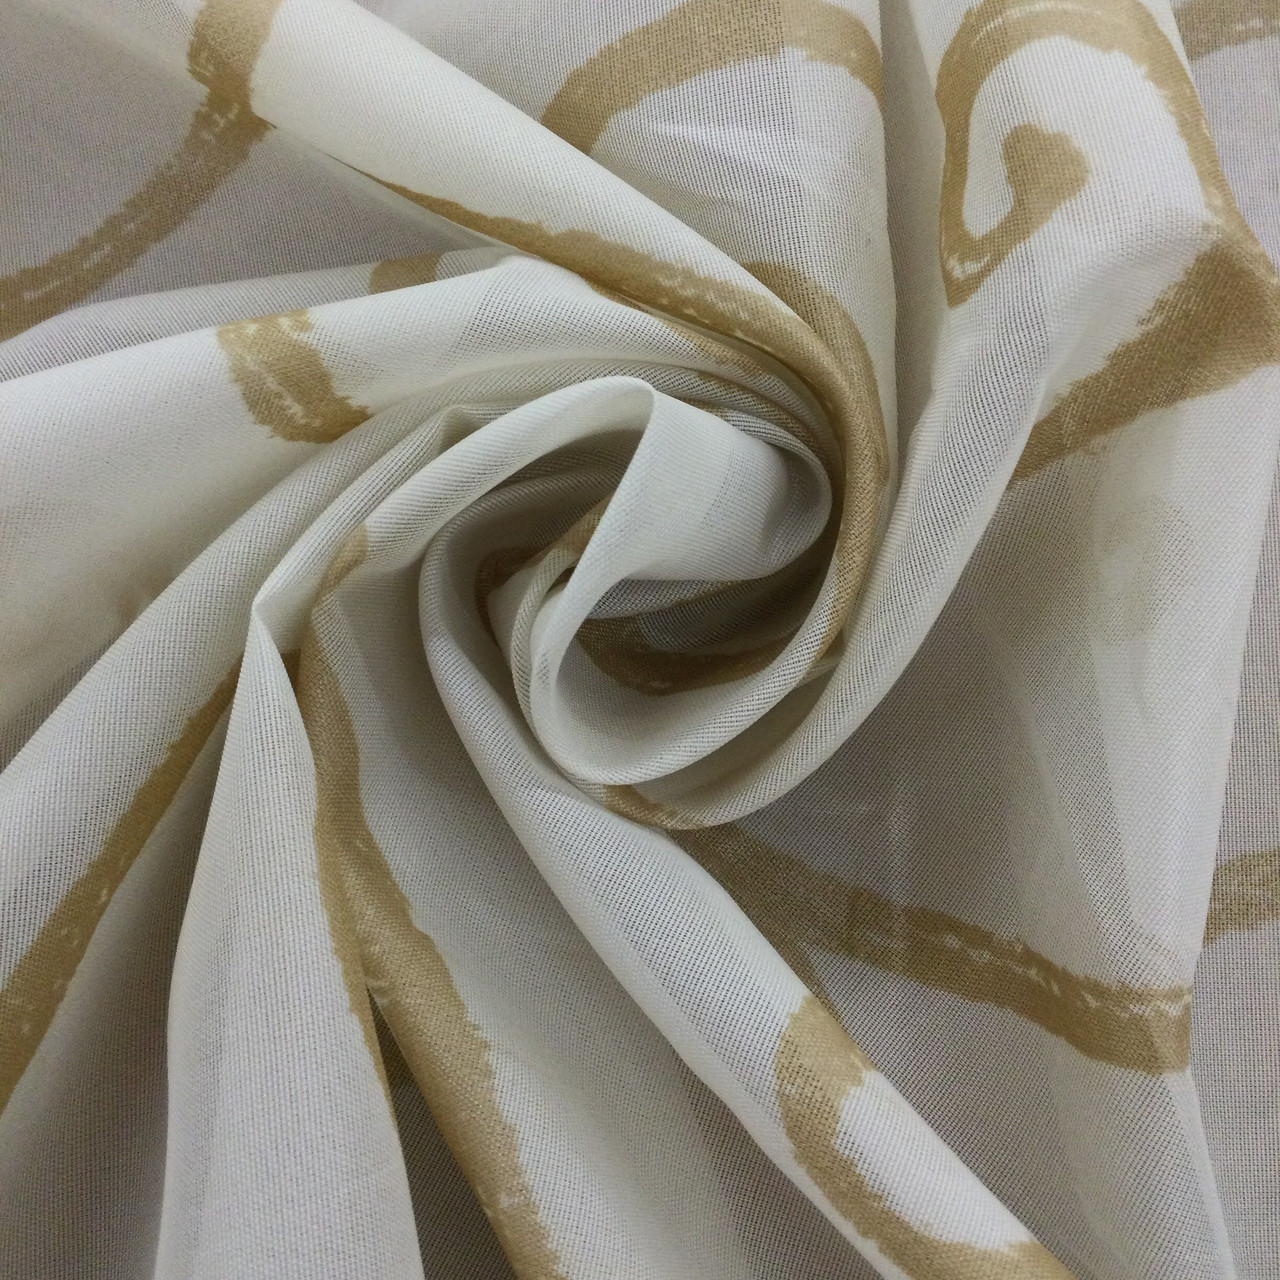 Gold Scroll on White Sheer Drapery Fabric, Allover Print, 100% Polyester, Drapery, Home Decor, By The Yard